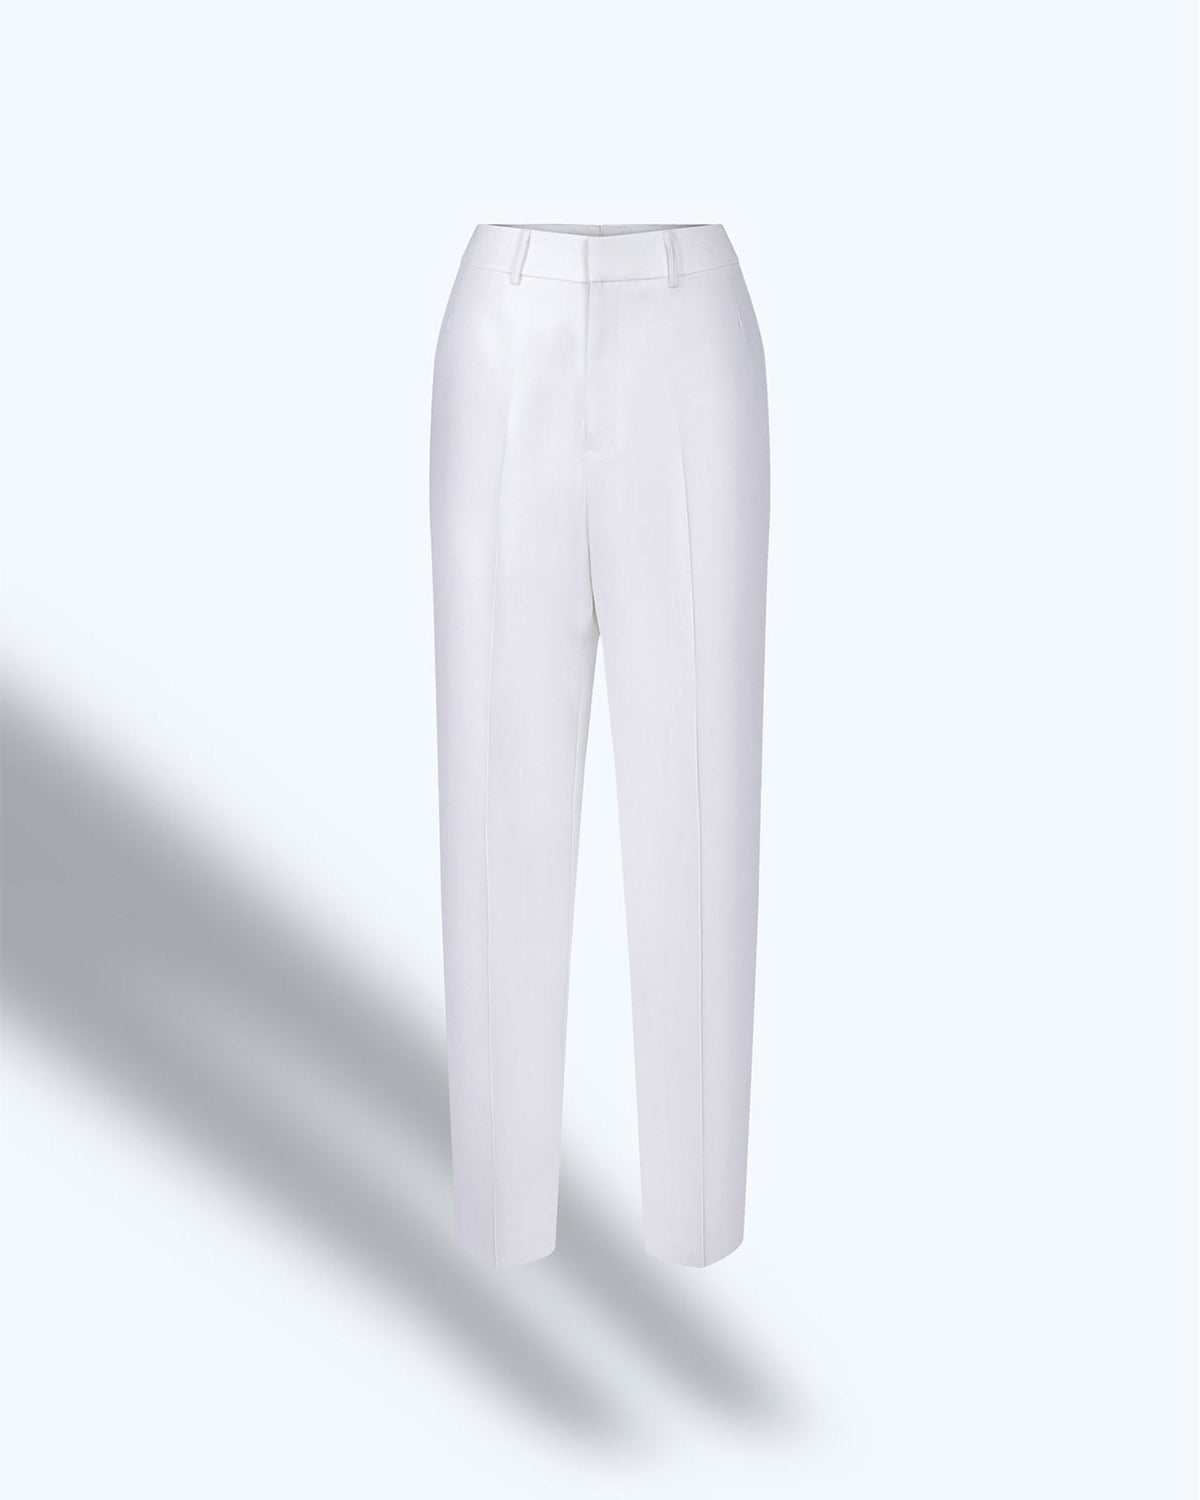 Tinyink-Fallwinter20-white-tailored-cigarette-trousers